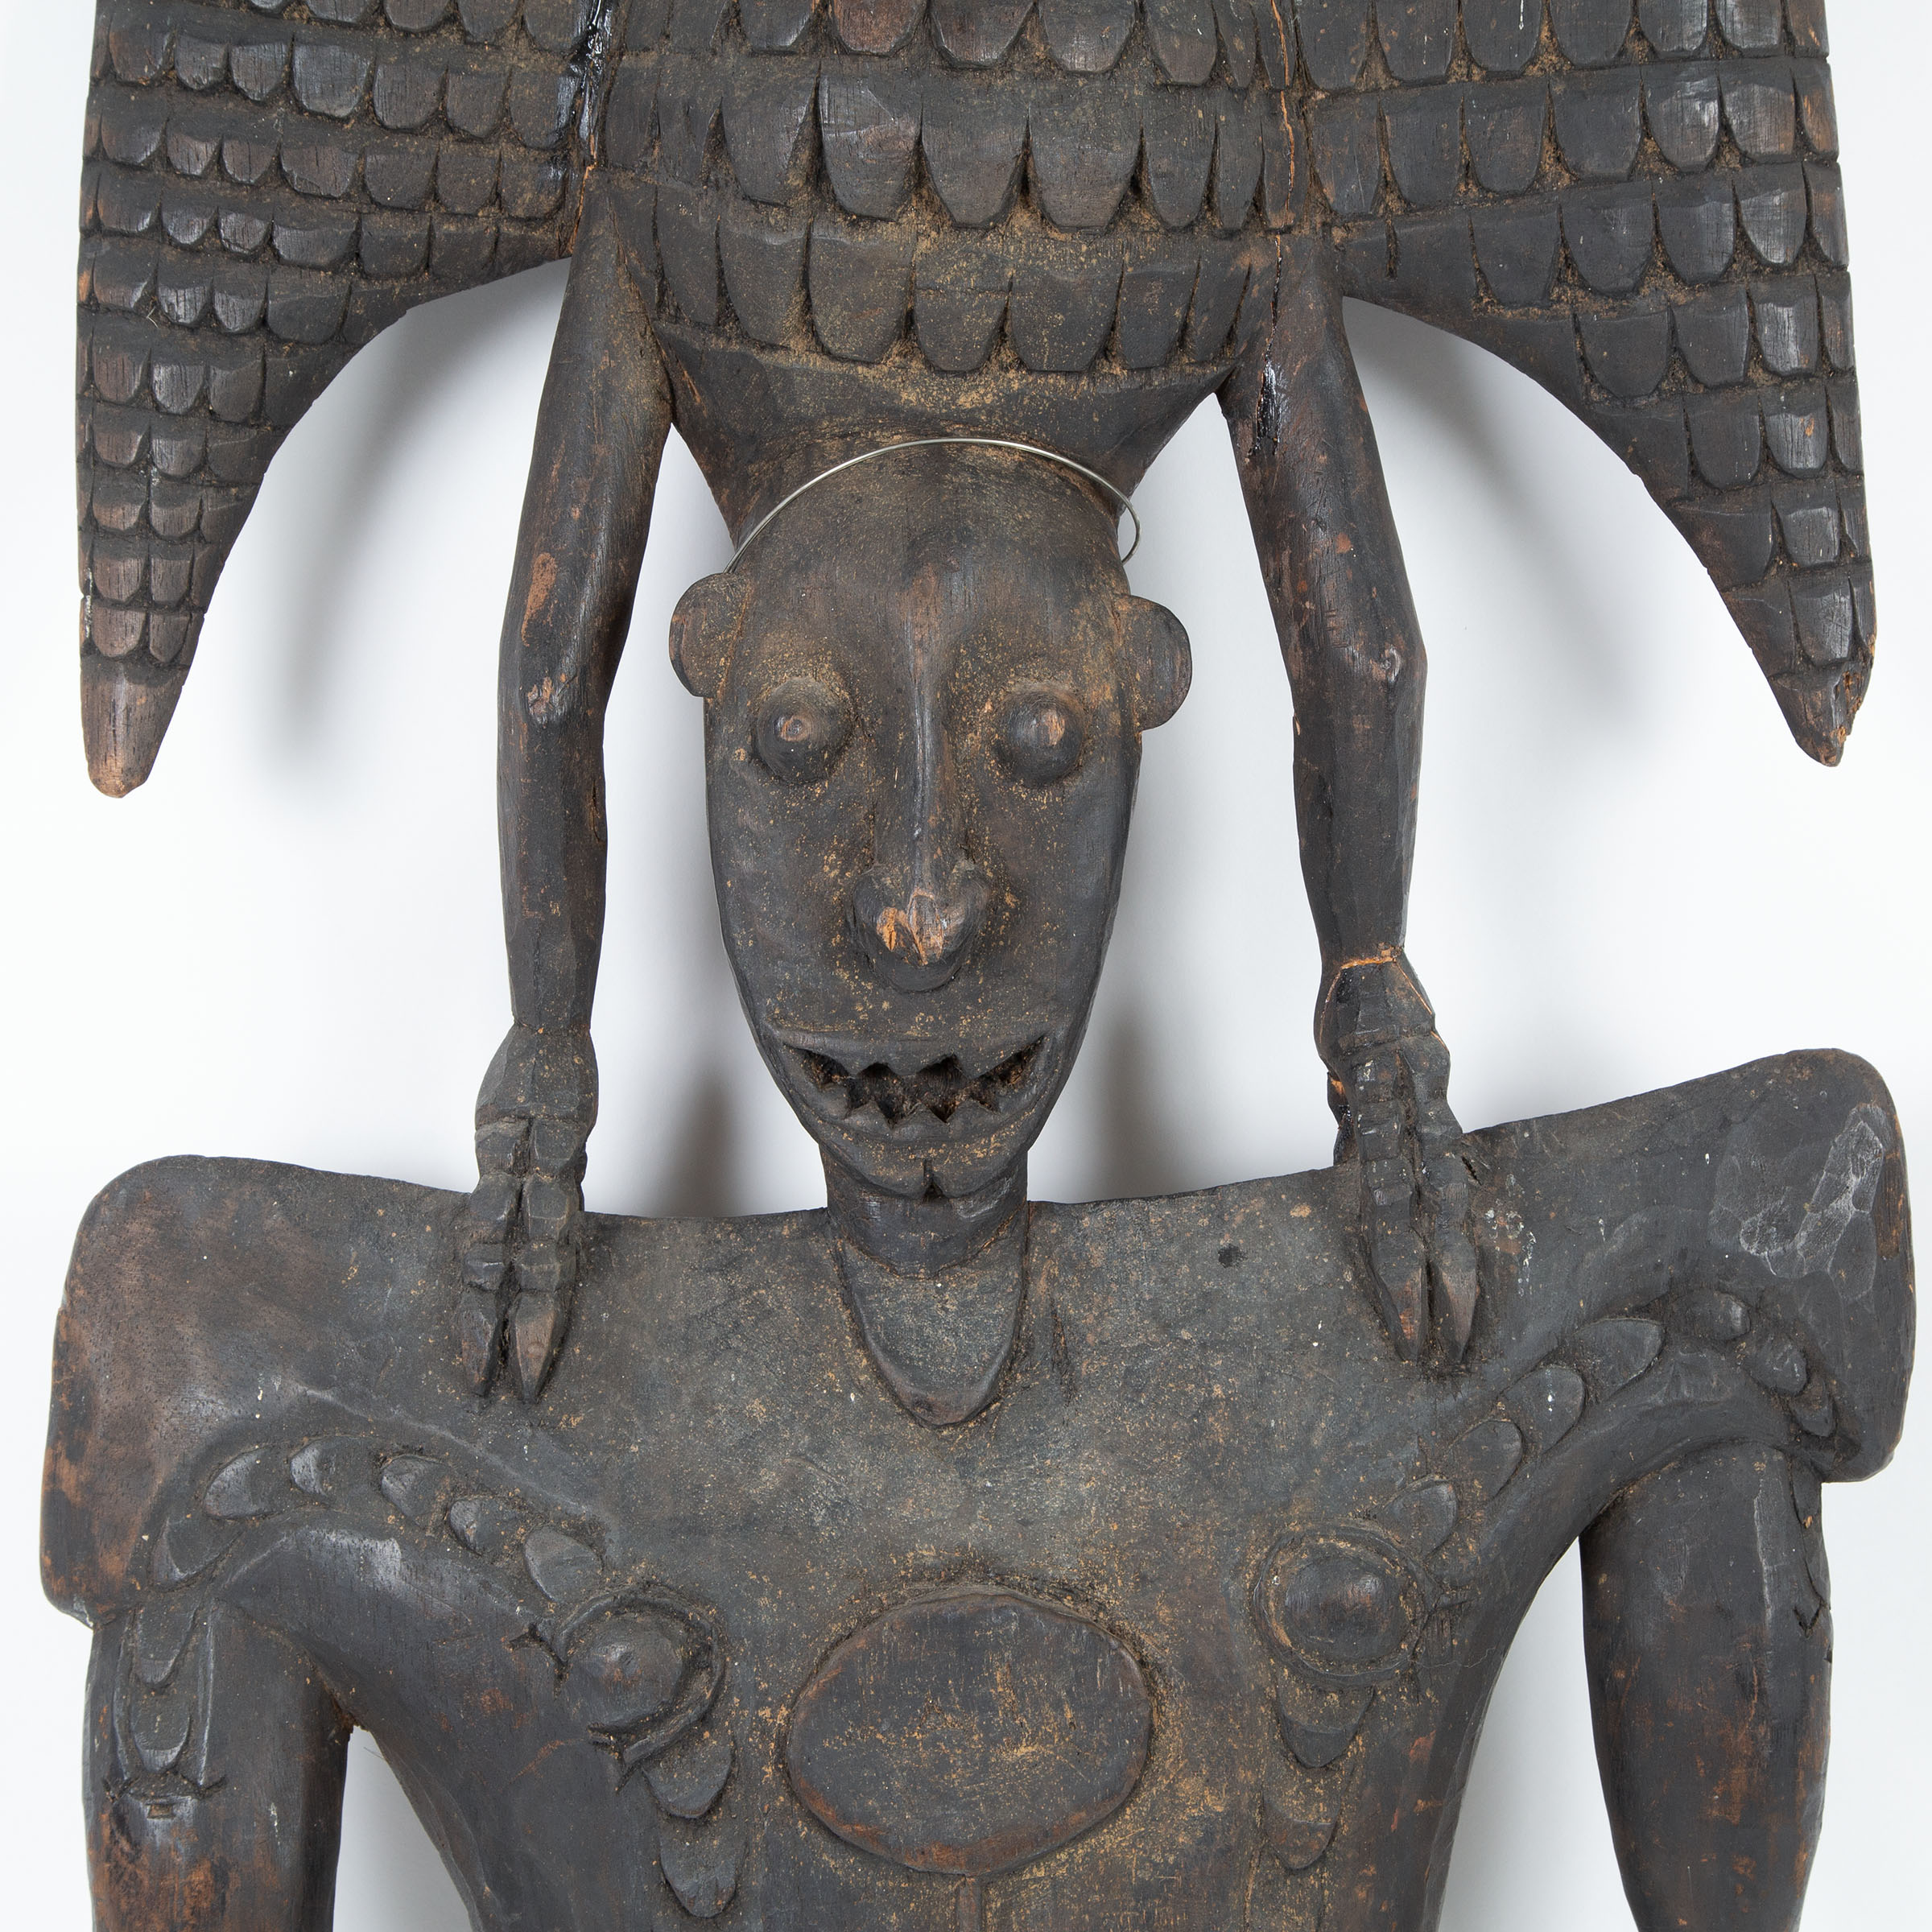 Papua New Guinea Figural Suspension/Food Hook with Bird Surmount, early 20th century